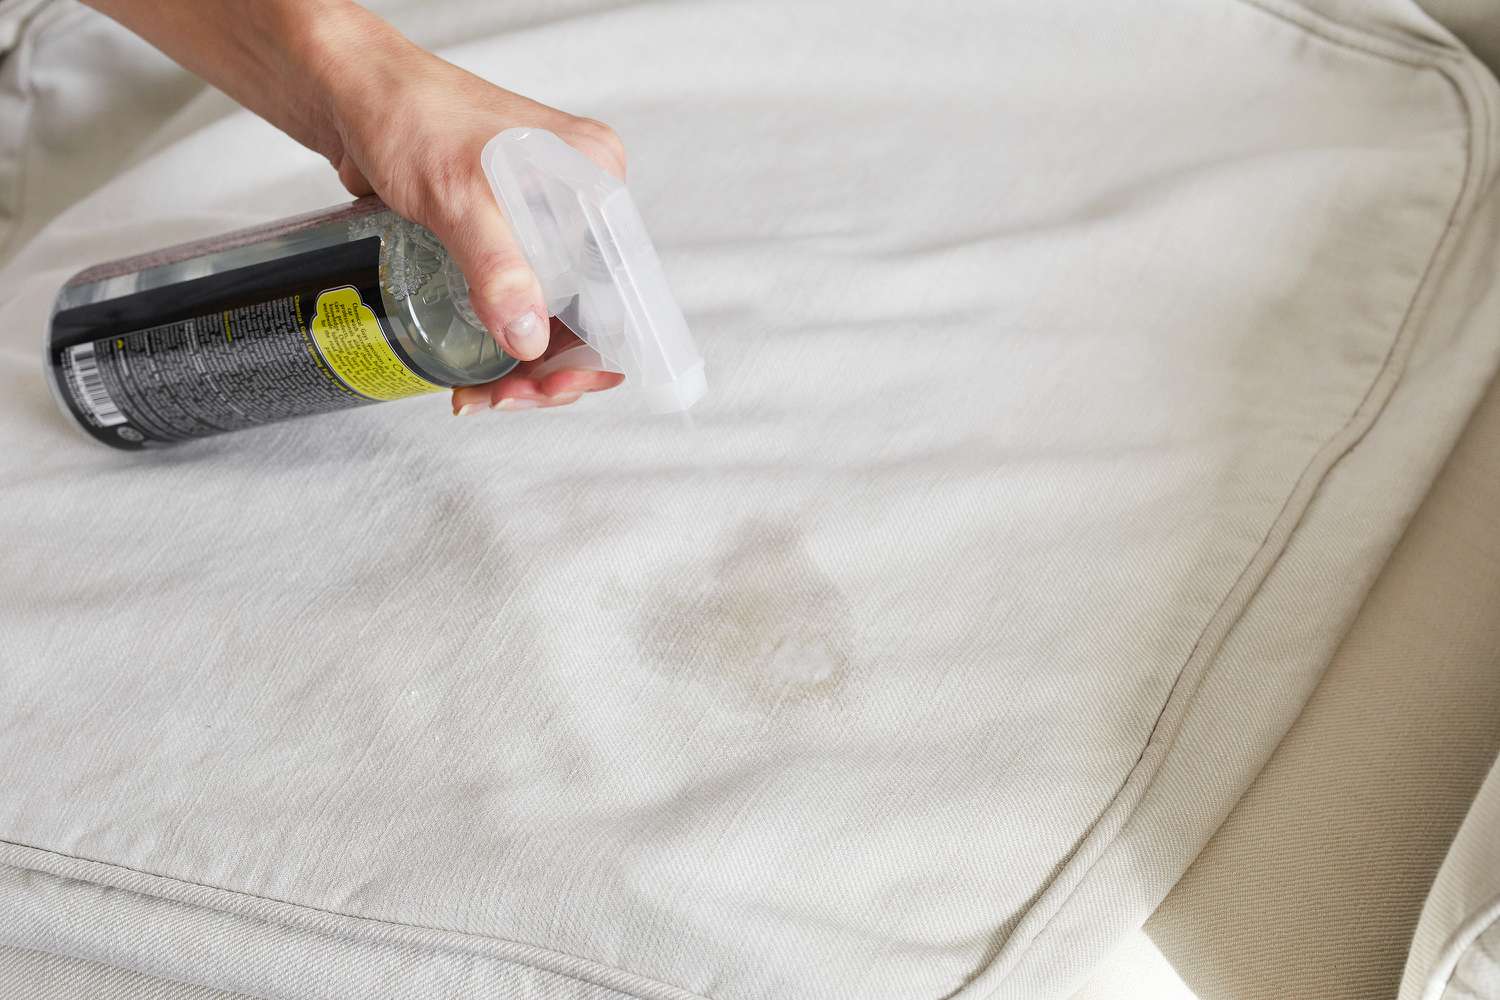 Applying dry cleaning solvent to a stain